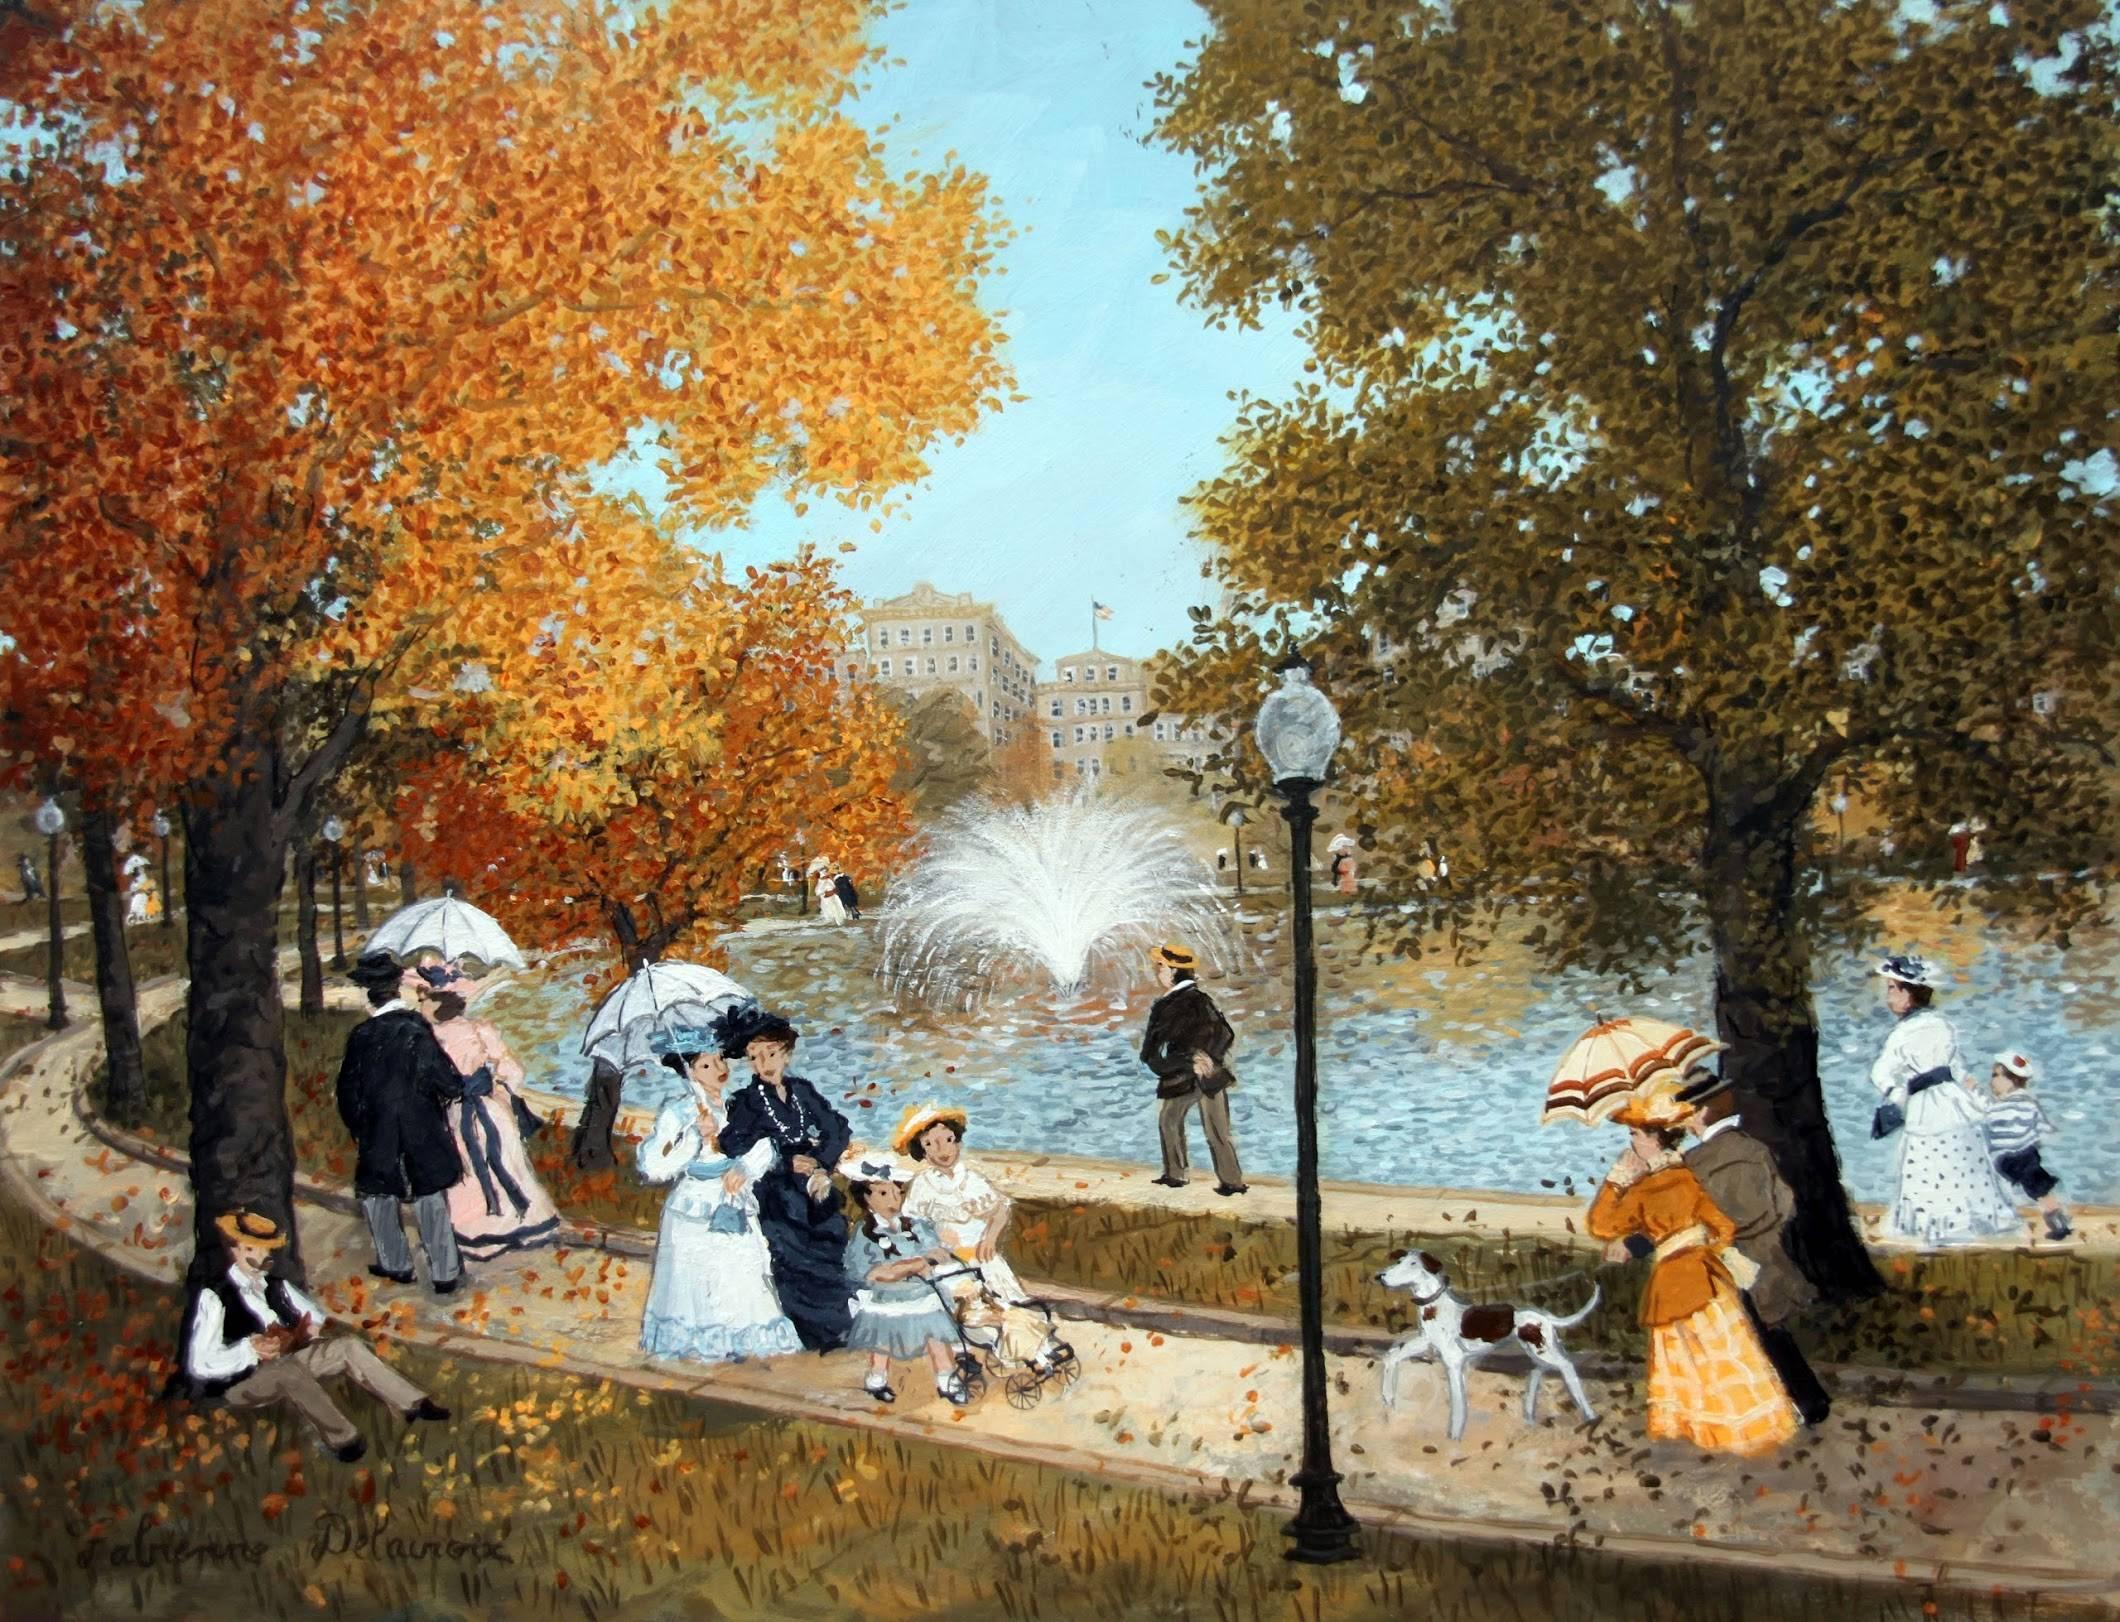 Boston Commons Frog Pond, Acrylic Paint on Board - Painting by Fabienne Delacroix